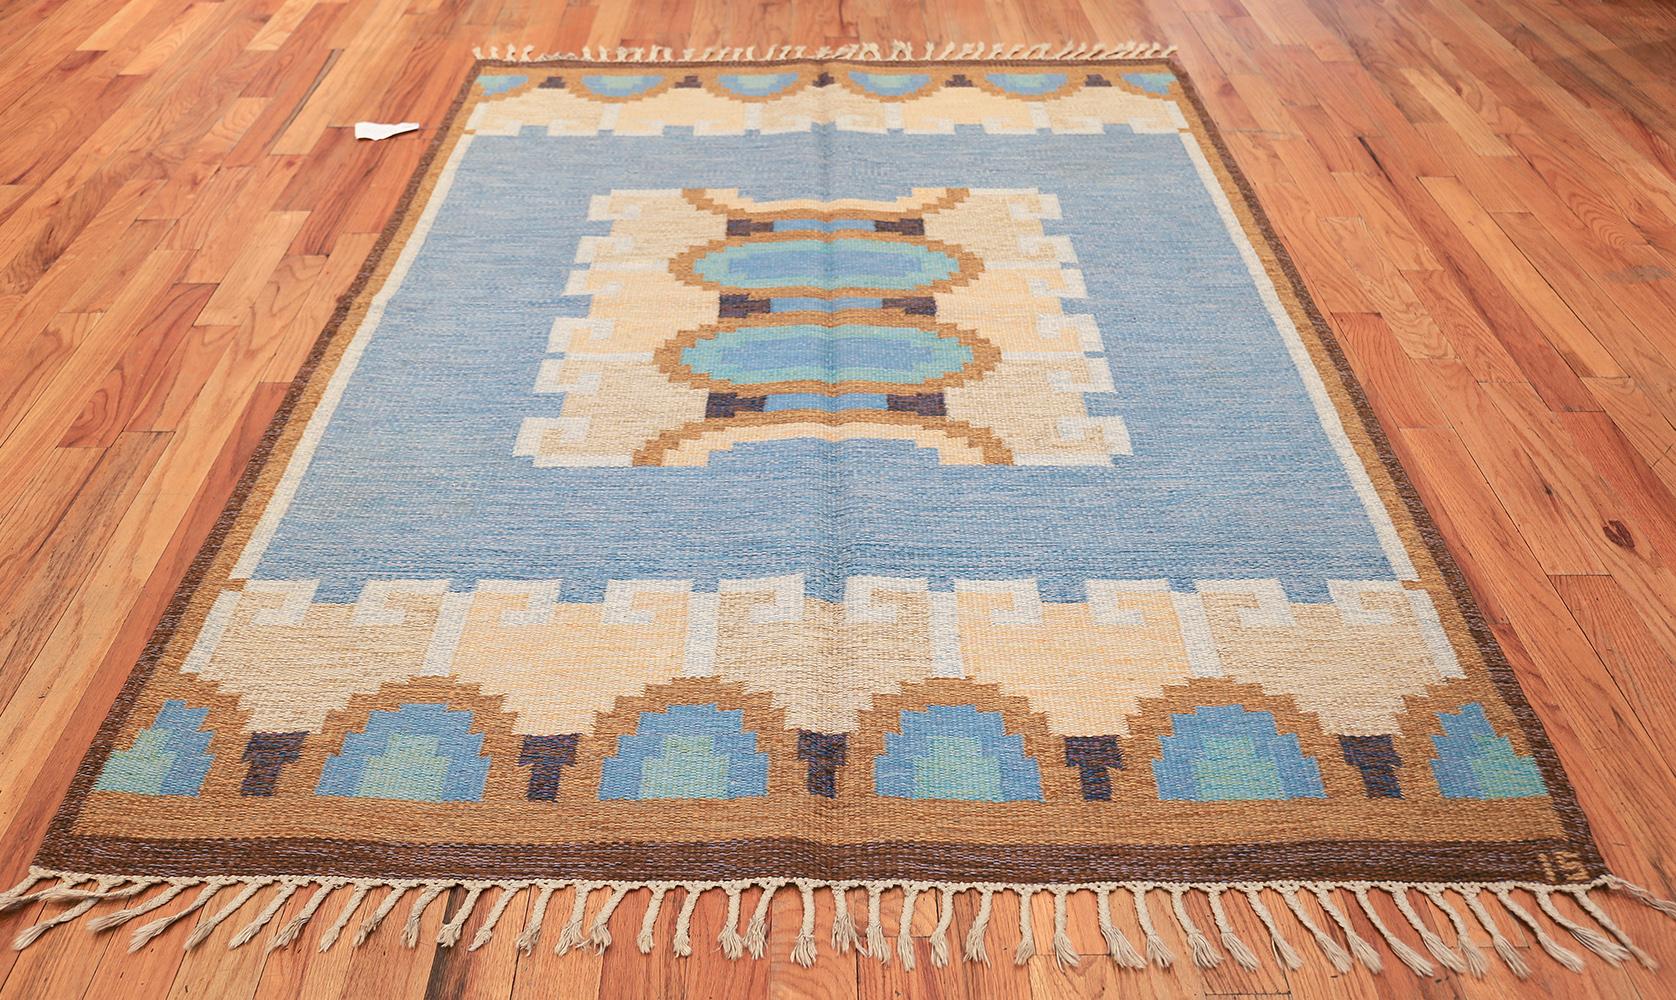 Chic and subdued, this beautiful, artfully decorated signed vintage Swedish Kilim depicts a bold rectilinear centerpiece that is adorned with angular ram's horns and radiant ovoid capsules that are filled with beautifully selected colors. The